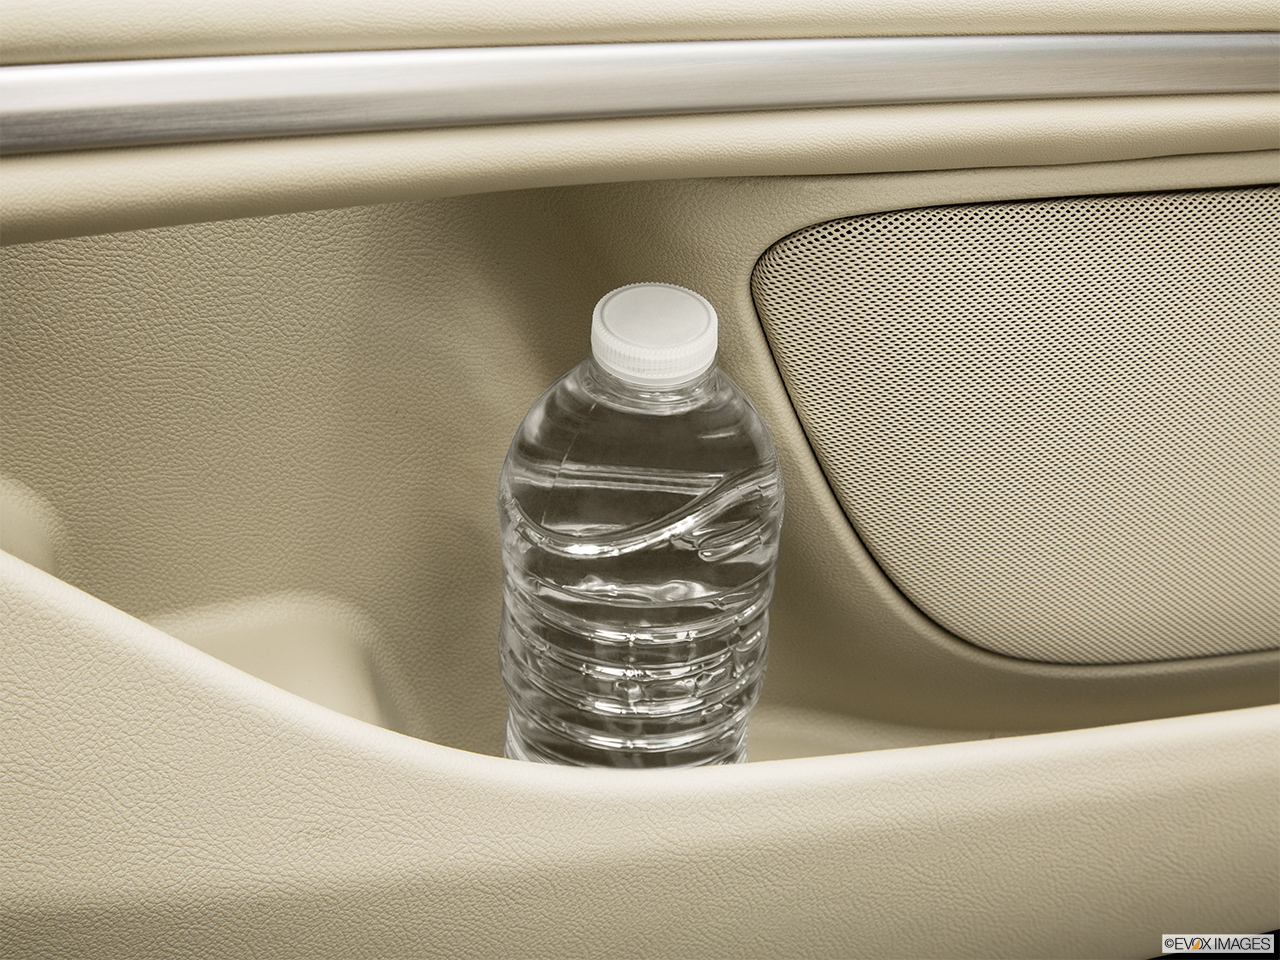 2015 Lincoln MKZ Base Second row side cup holder with coffee prop, or second row door cup holder with water bottle. 